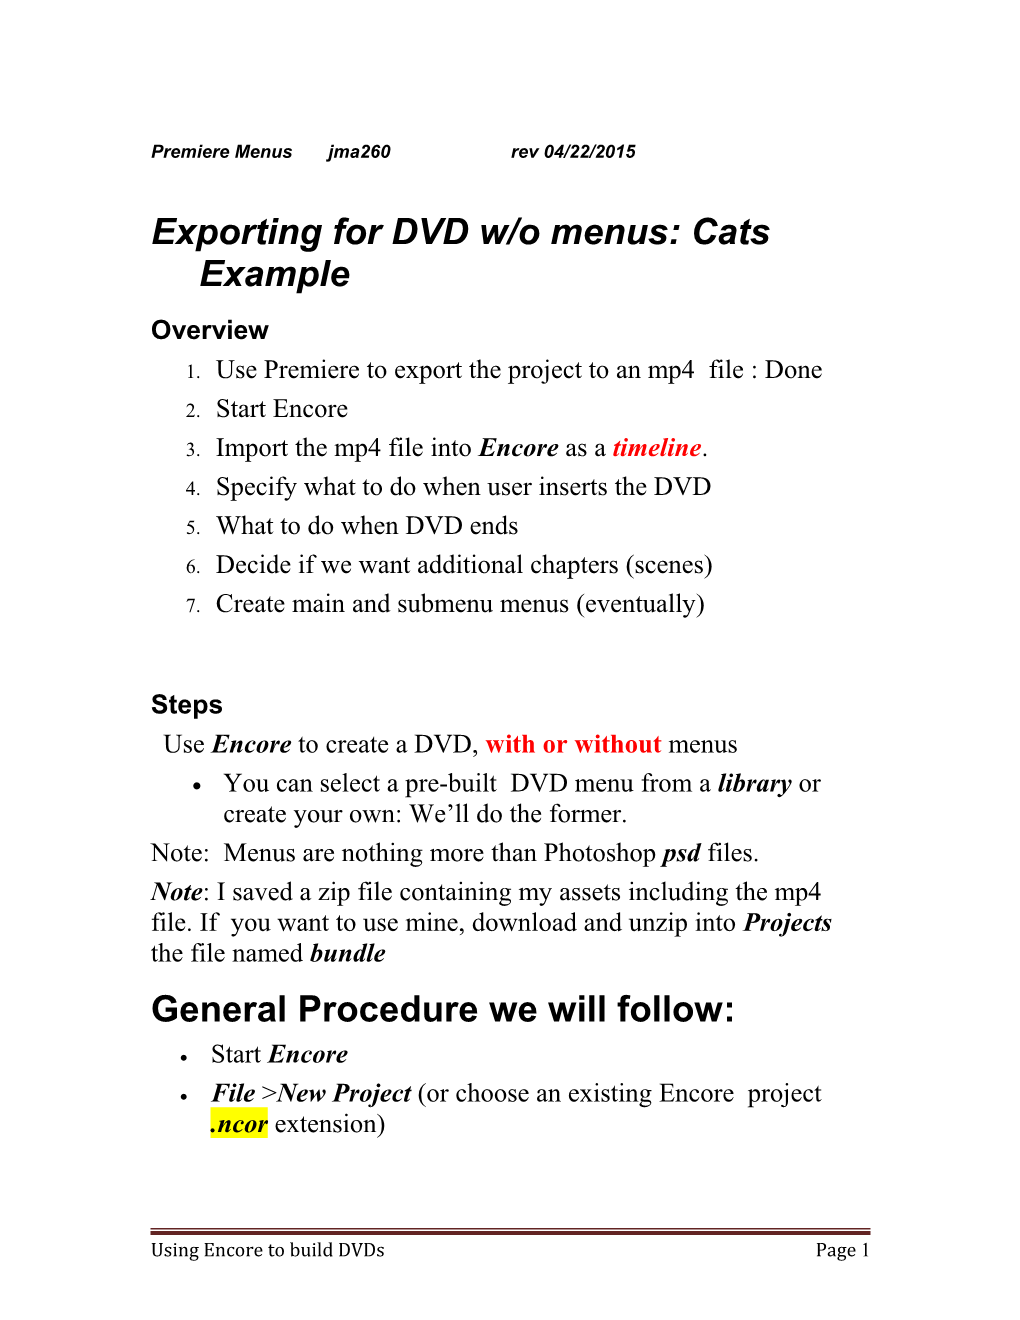 Exporting for DVD W/O Menus: Cats Example